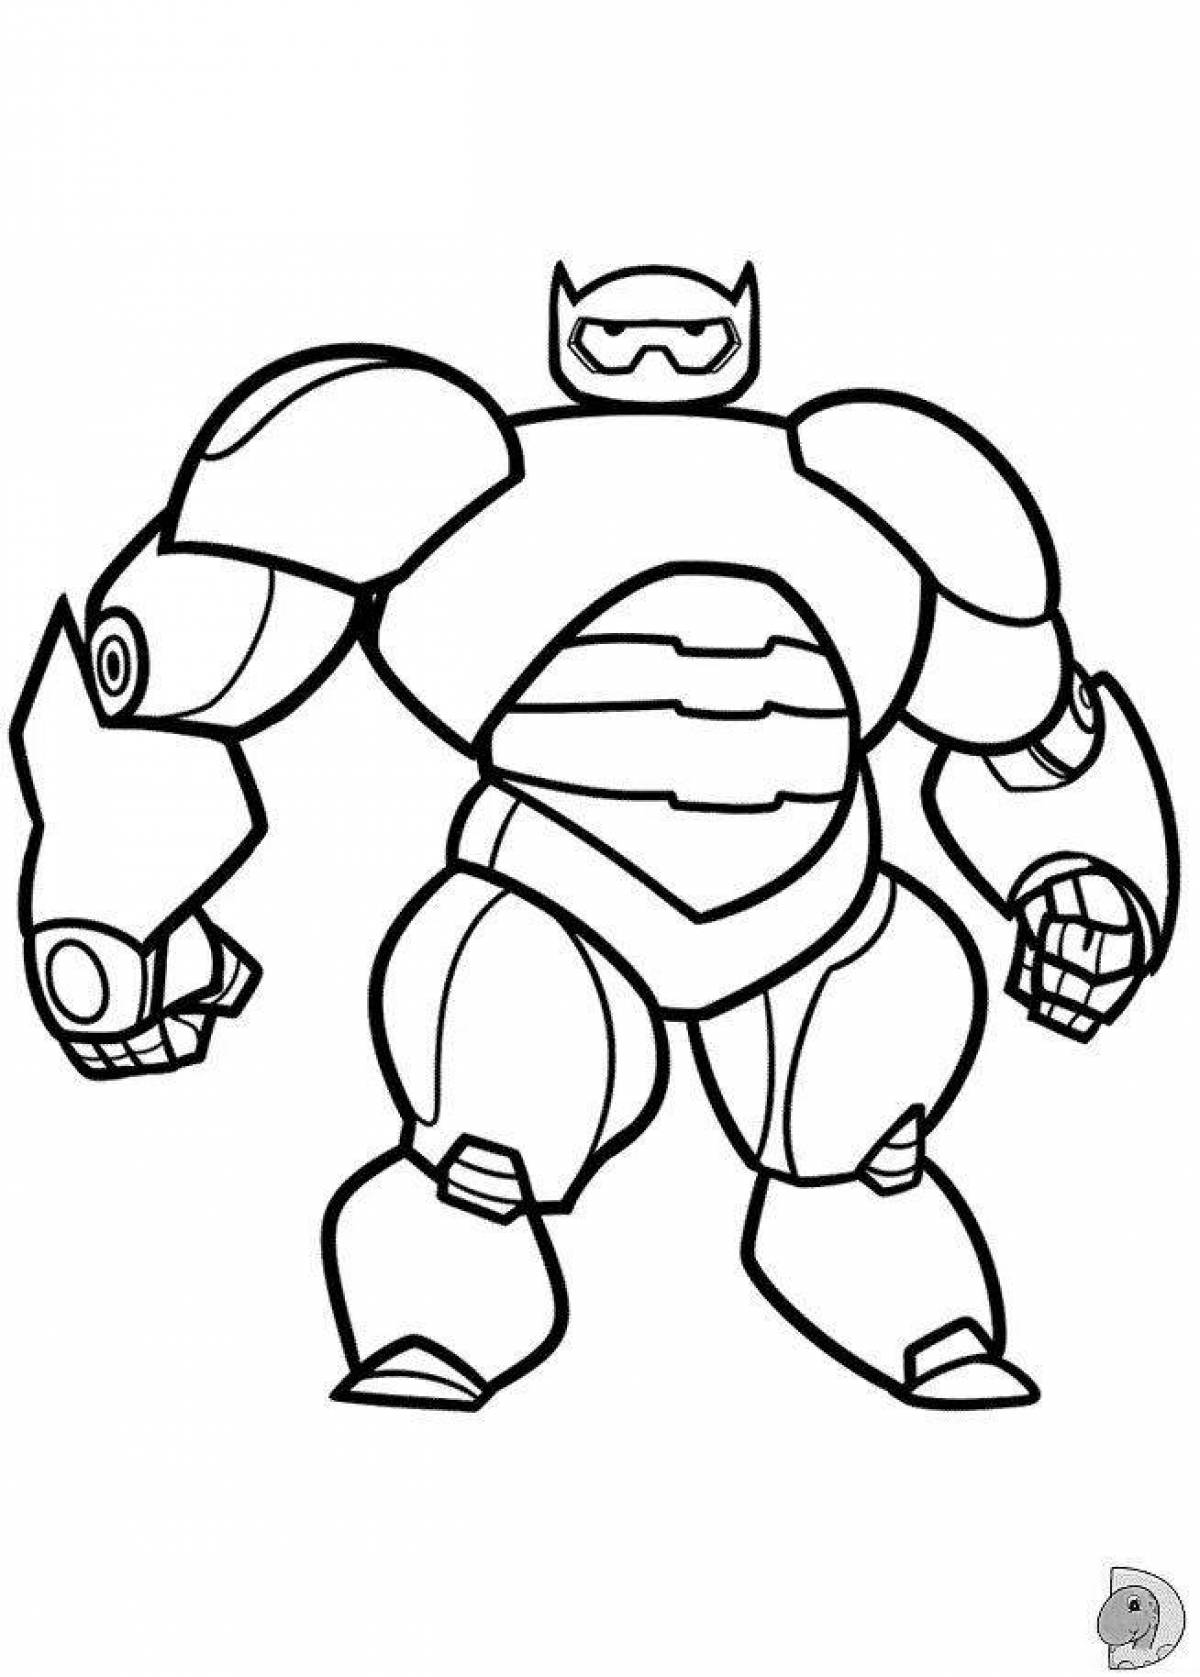 Playful baymax coloring page